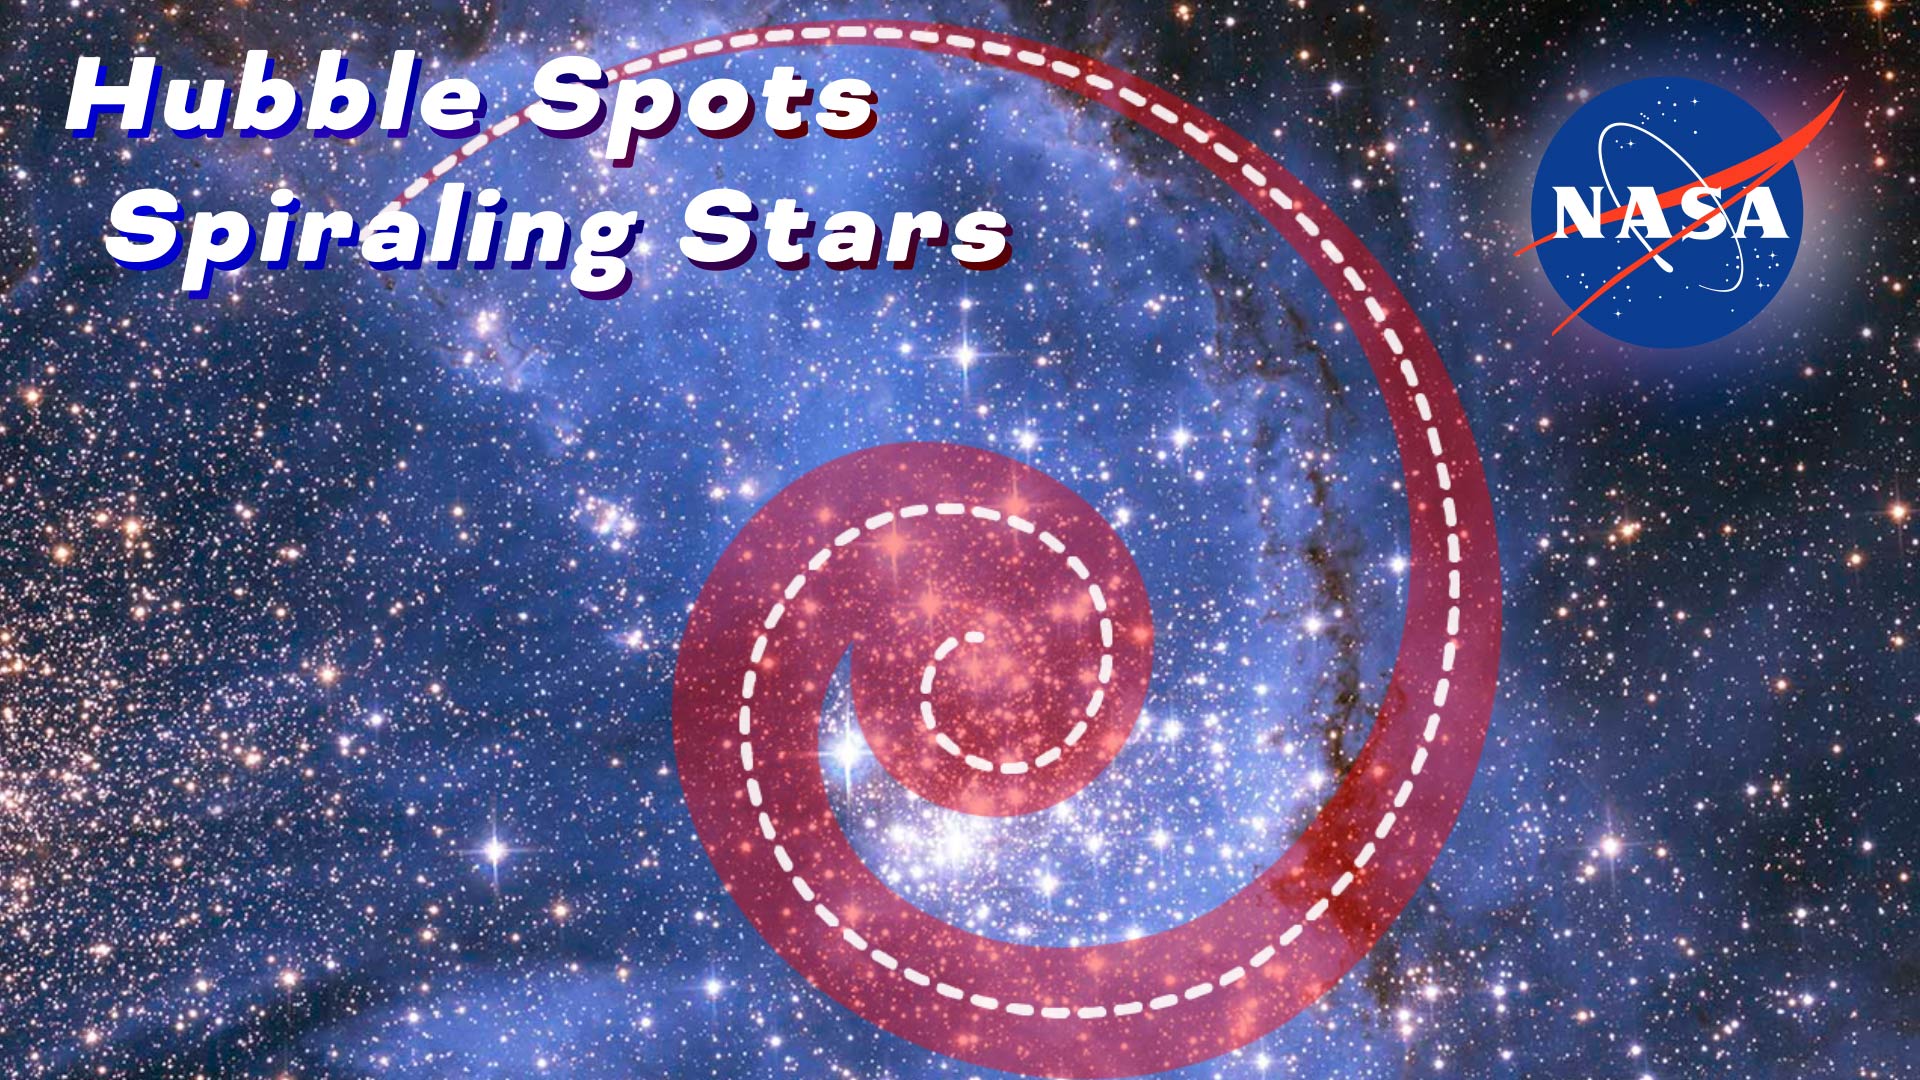 Preview Image for Hubble Spots Spiraling Stars